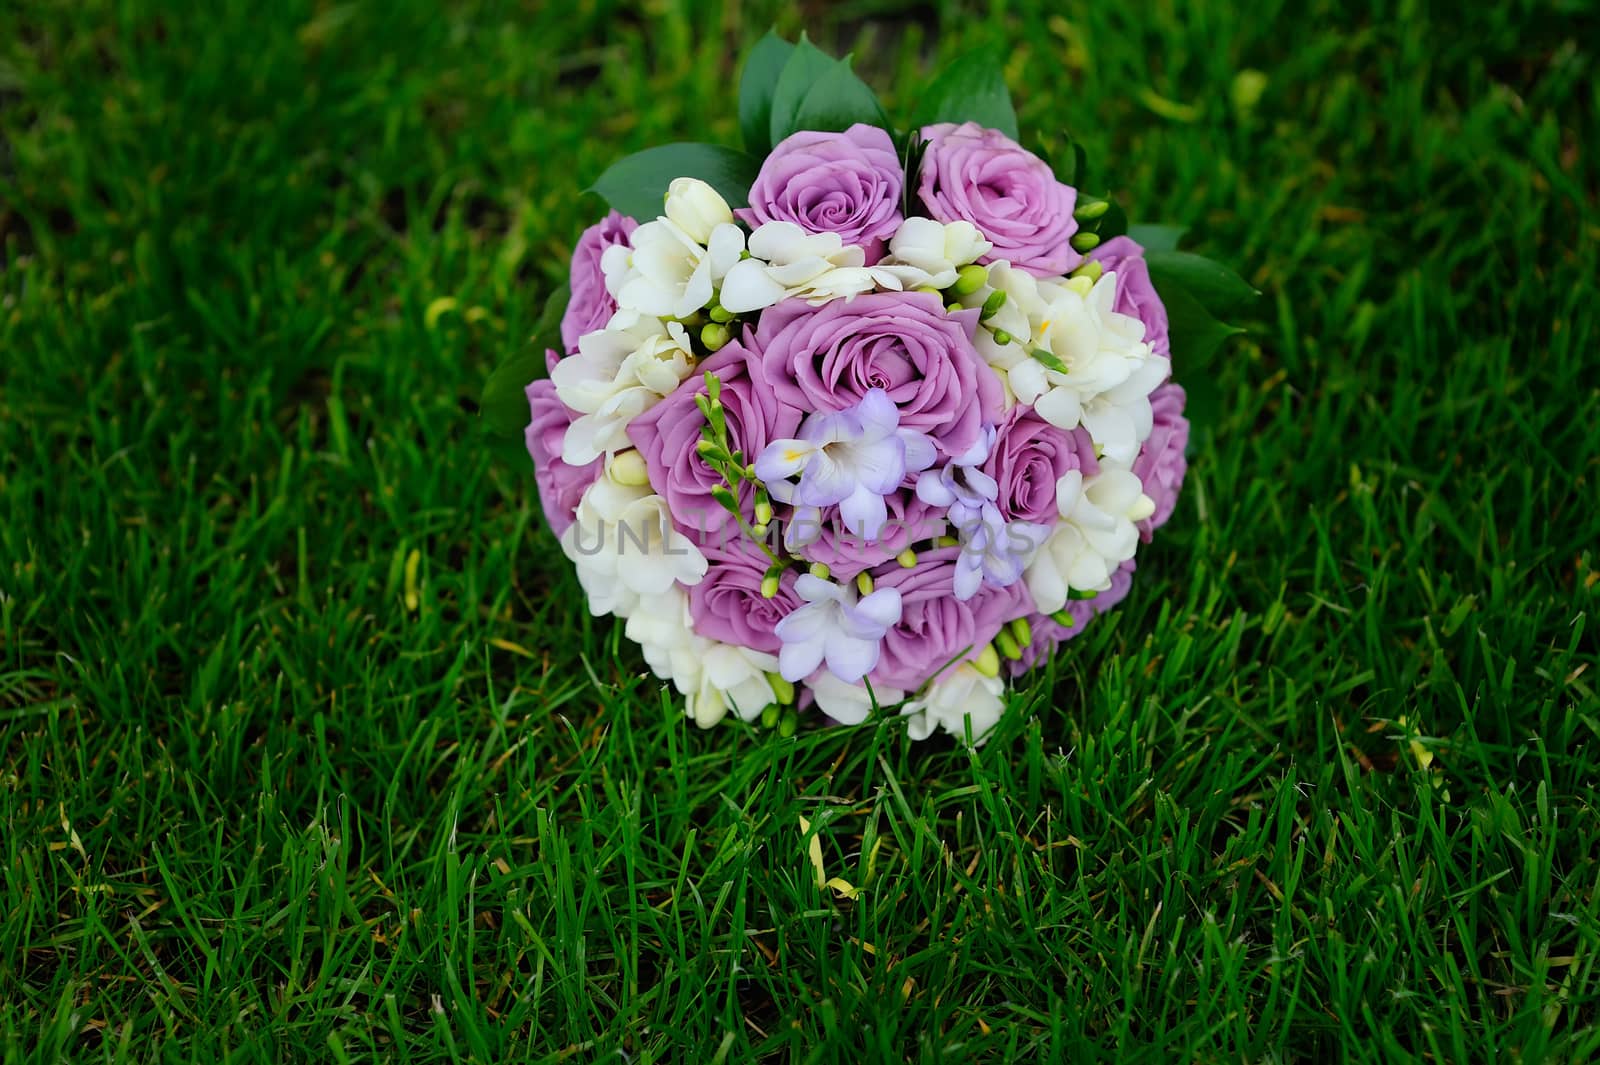 pink and white wedding bouquet  by timonko